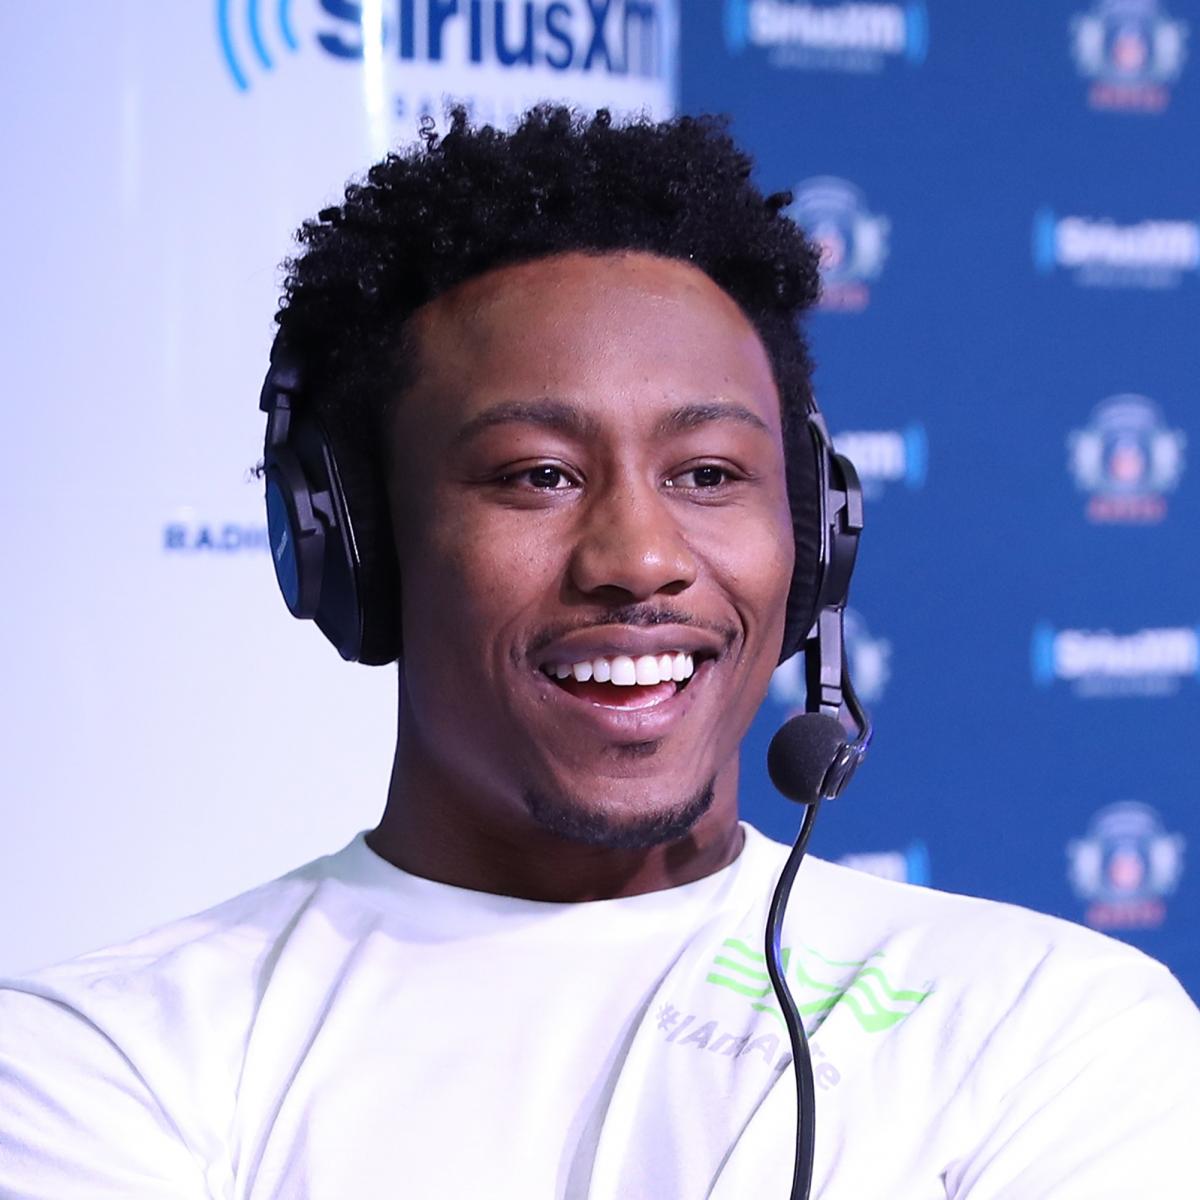 Brandon Marshall Laughs at Jay Cutler Naked Photo on Instagram in TMZ Interview - Bleacher Report